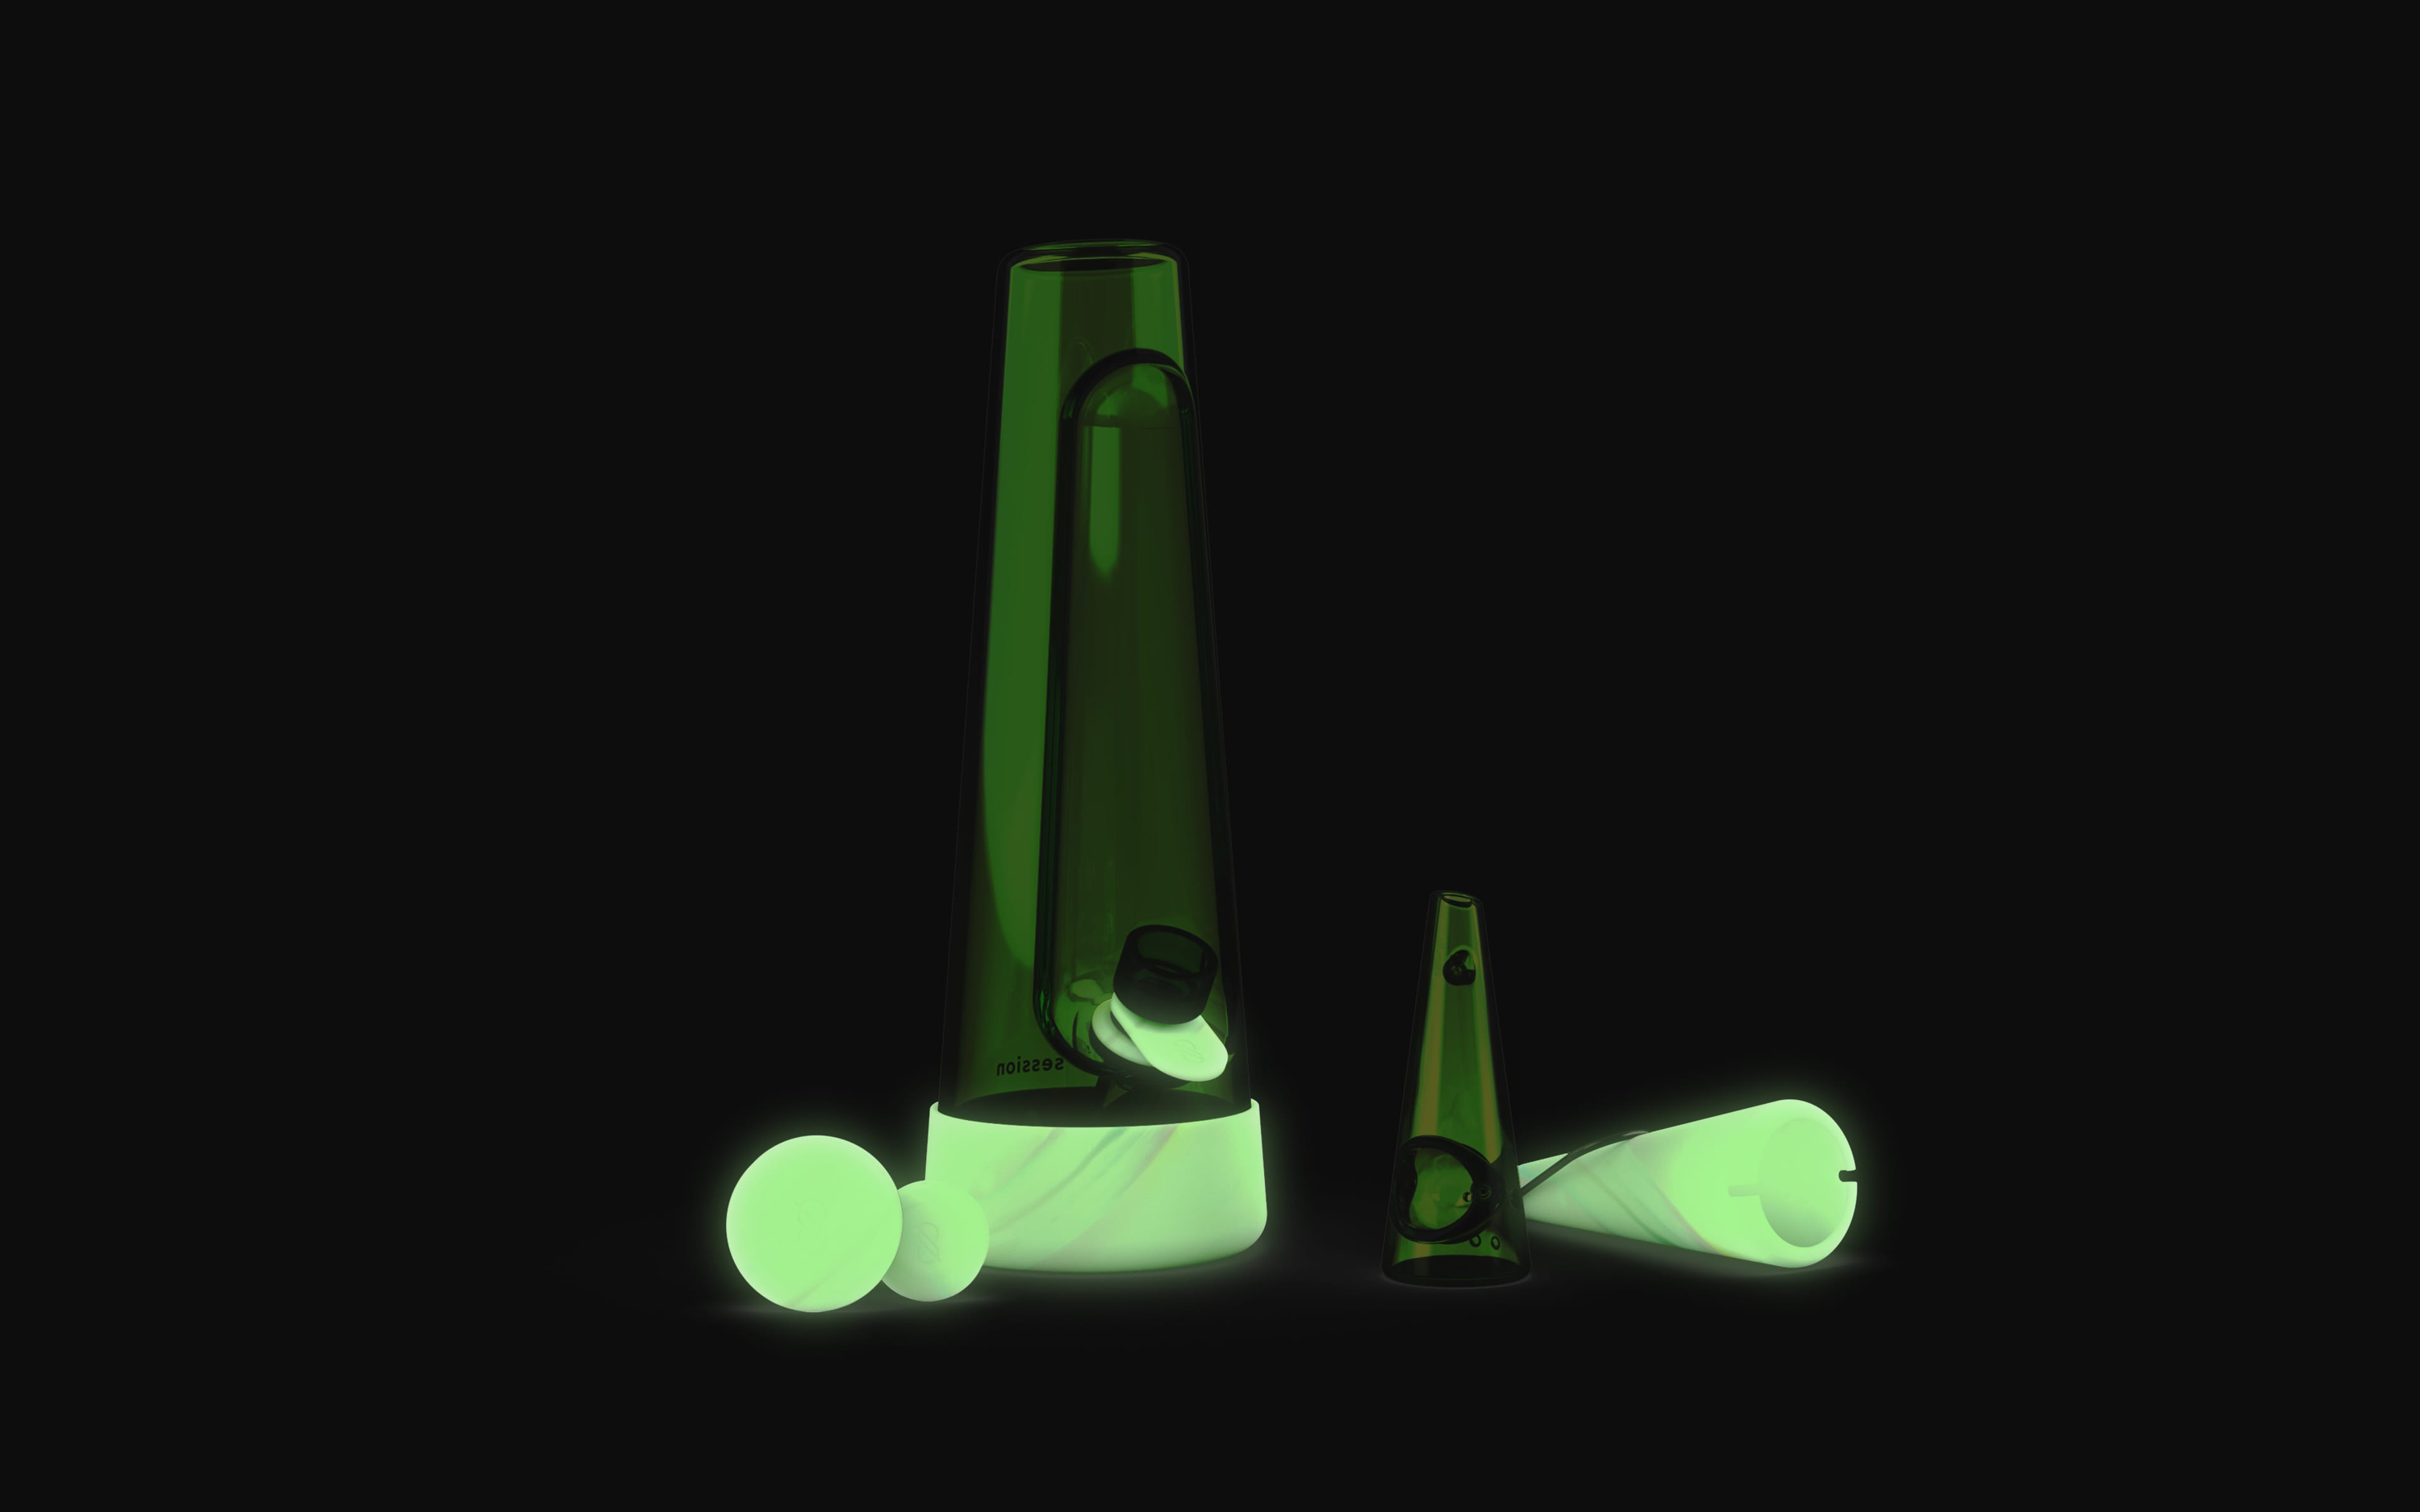 green tinted glass bong with a swirled glow-in-the-dark silicone with studio lights off, showing off the glow aspect